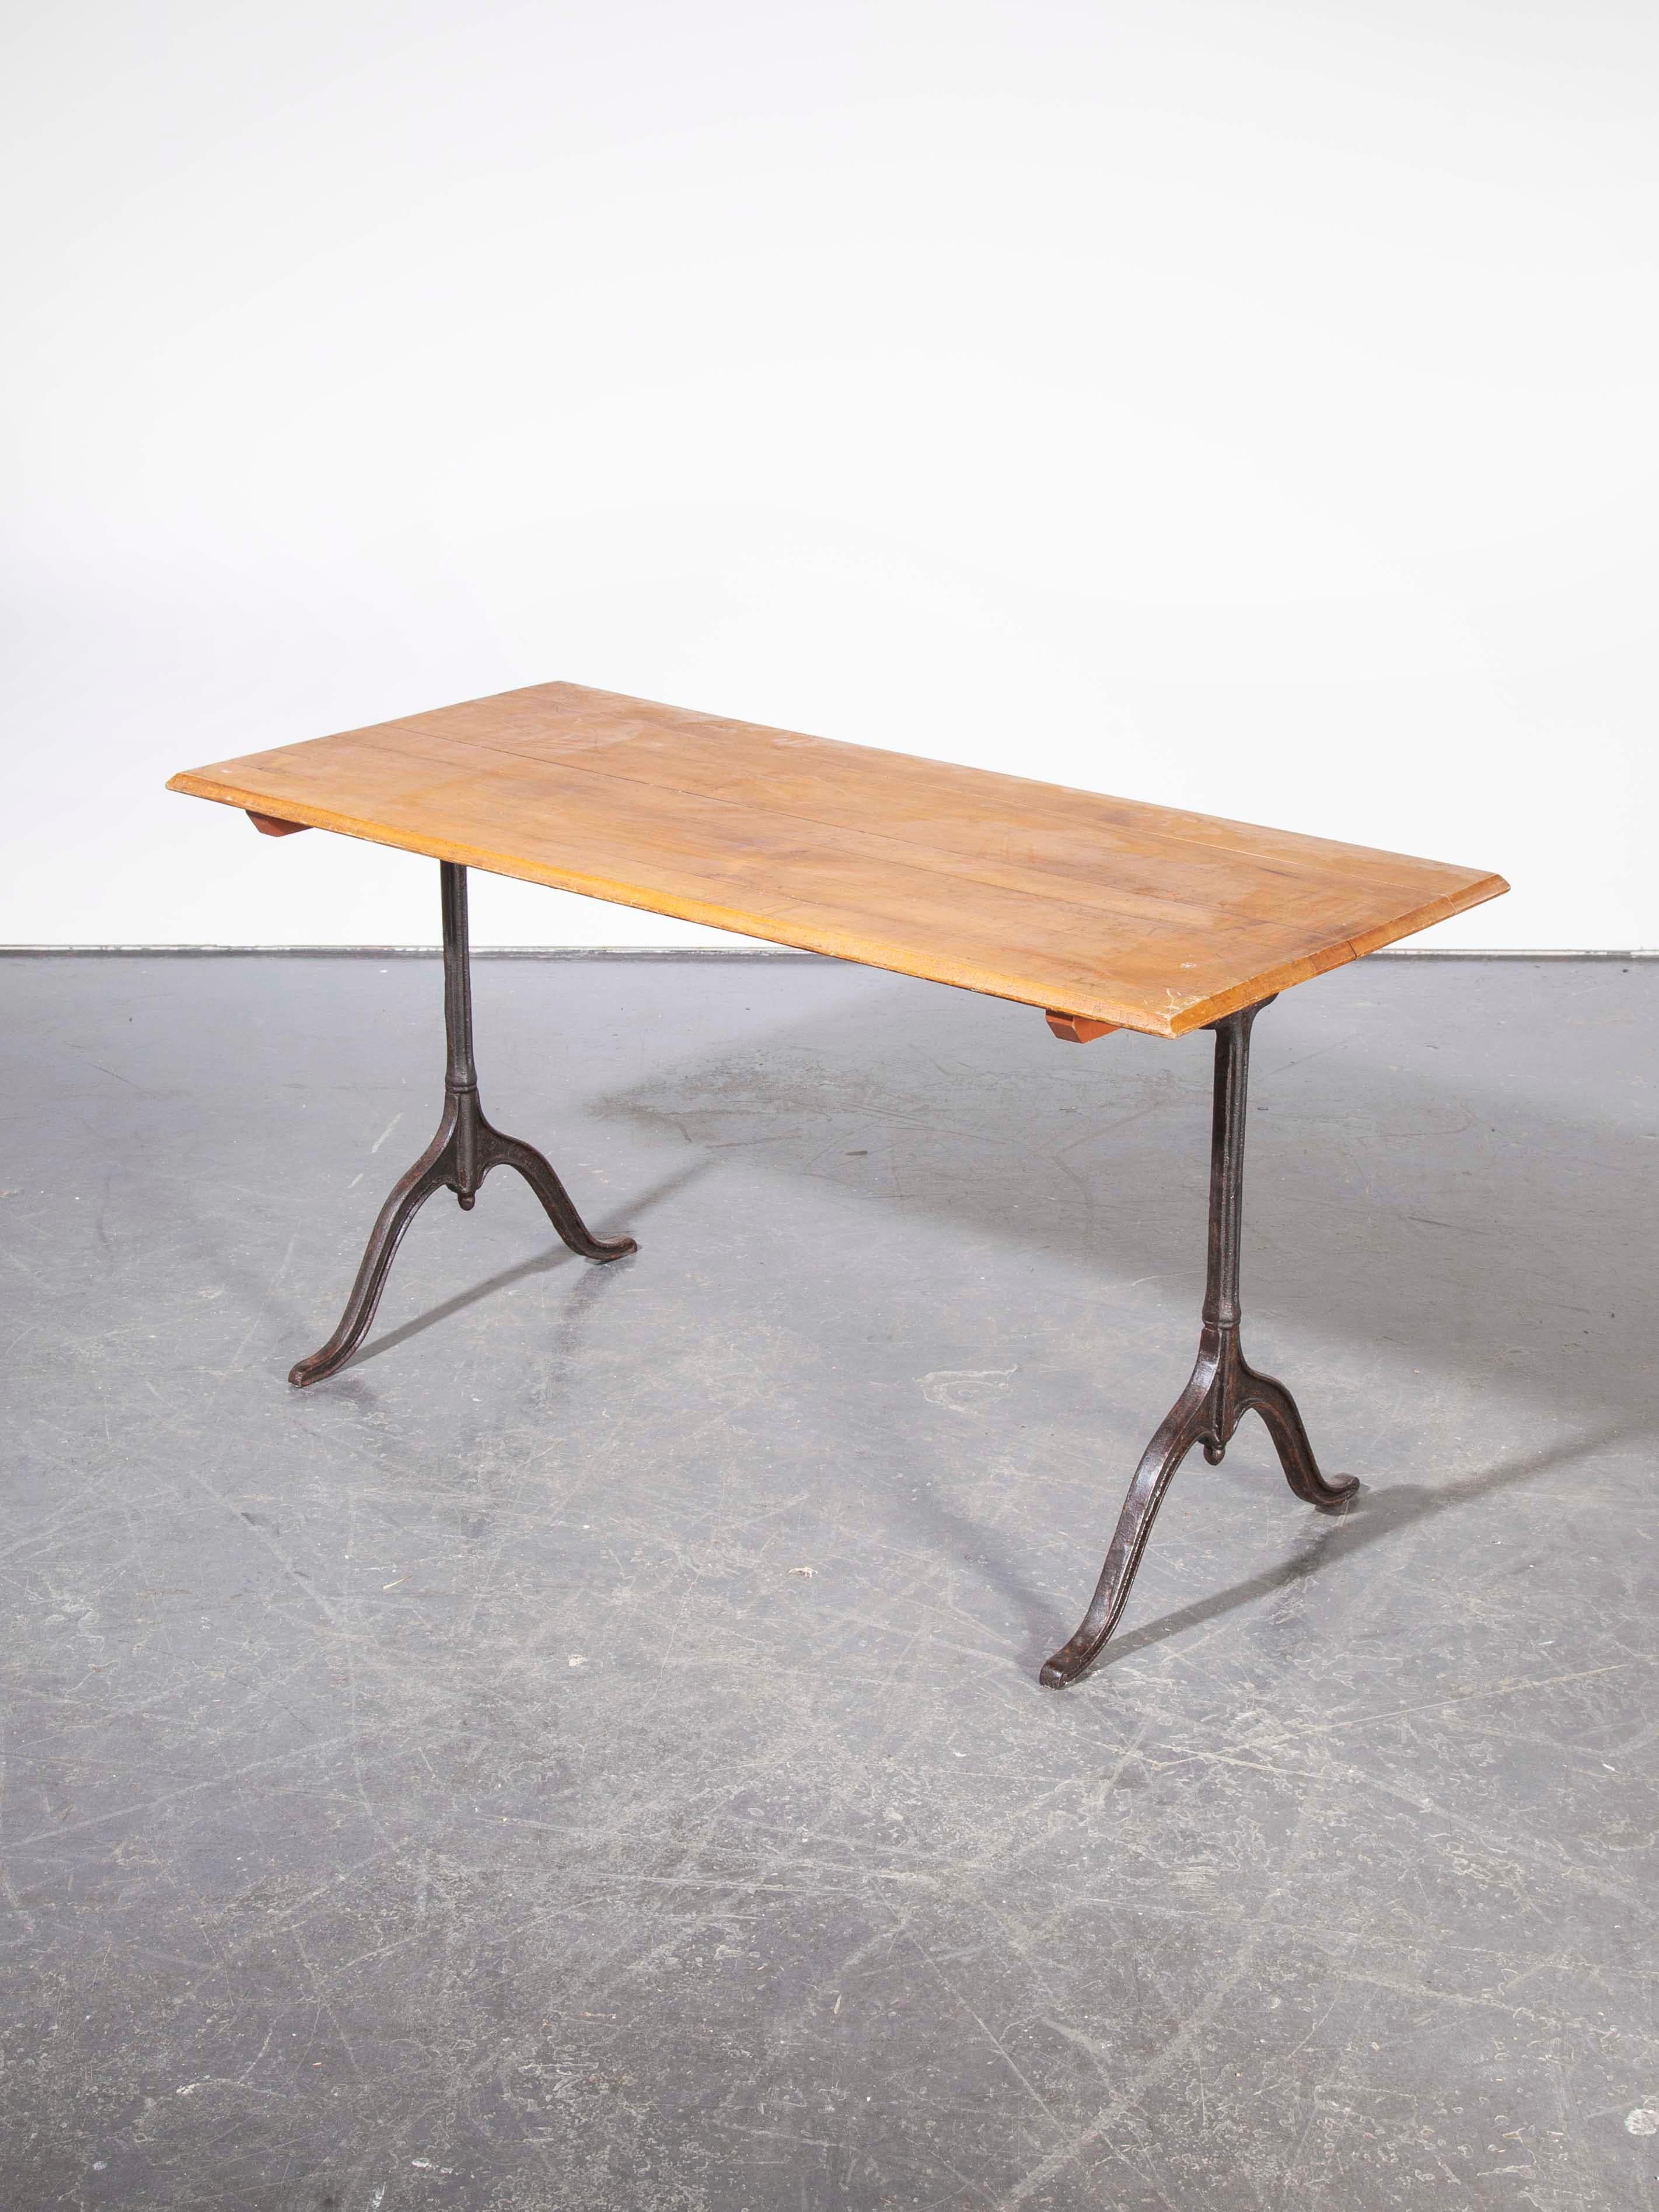 1930s cast metal base Kronenbourg café dining – bistro table – model three. Four tables are available, this is a listing for one table as photographed. Sourced from the original Kronenbourg site in Alsace, these were found languishing in a disused